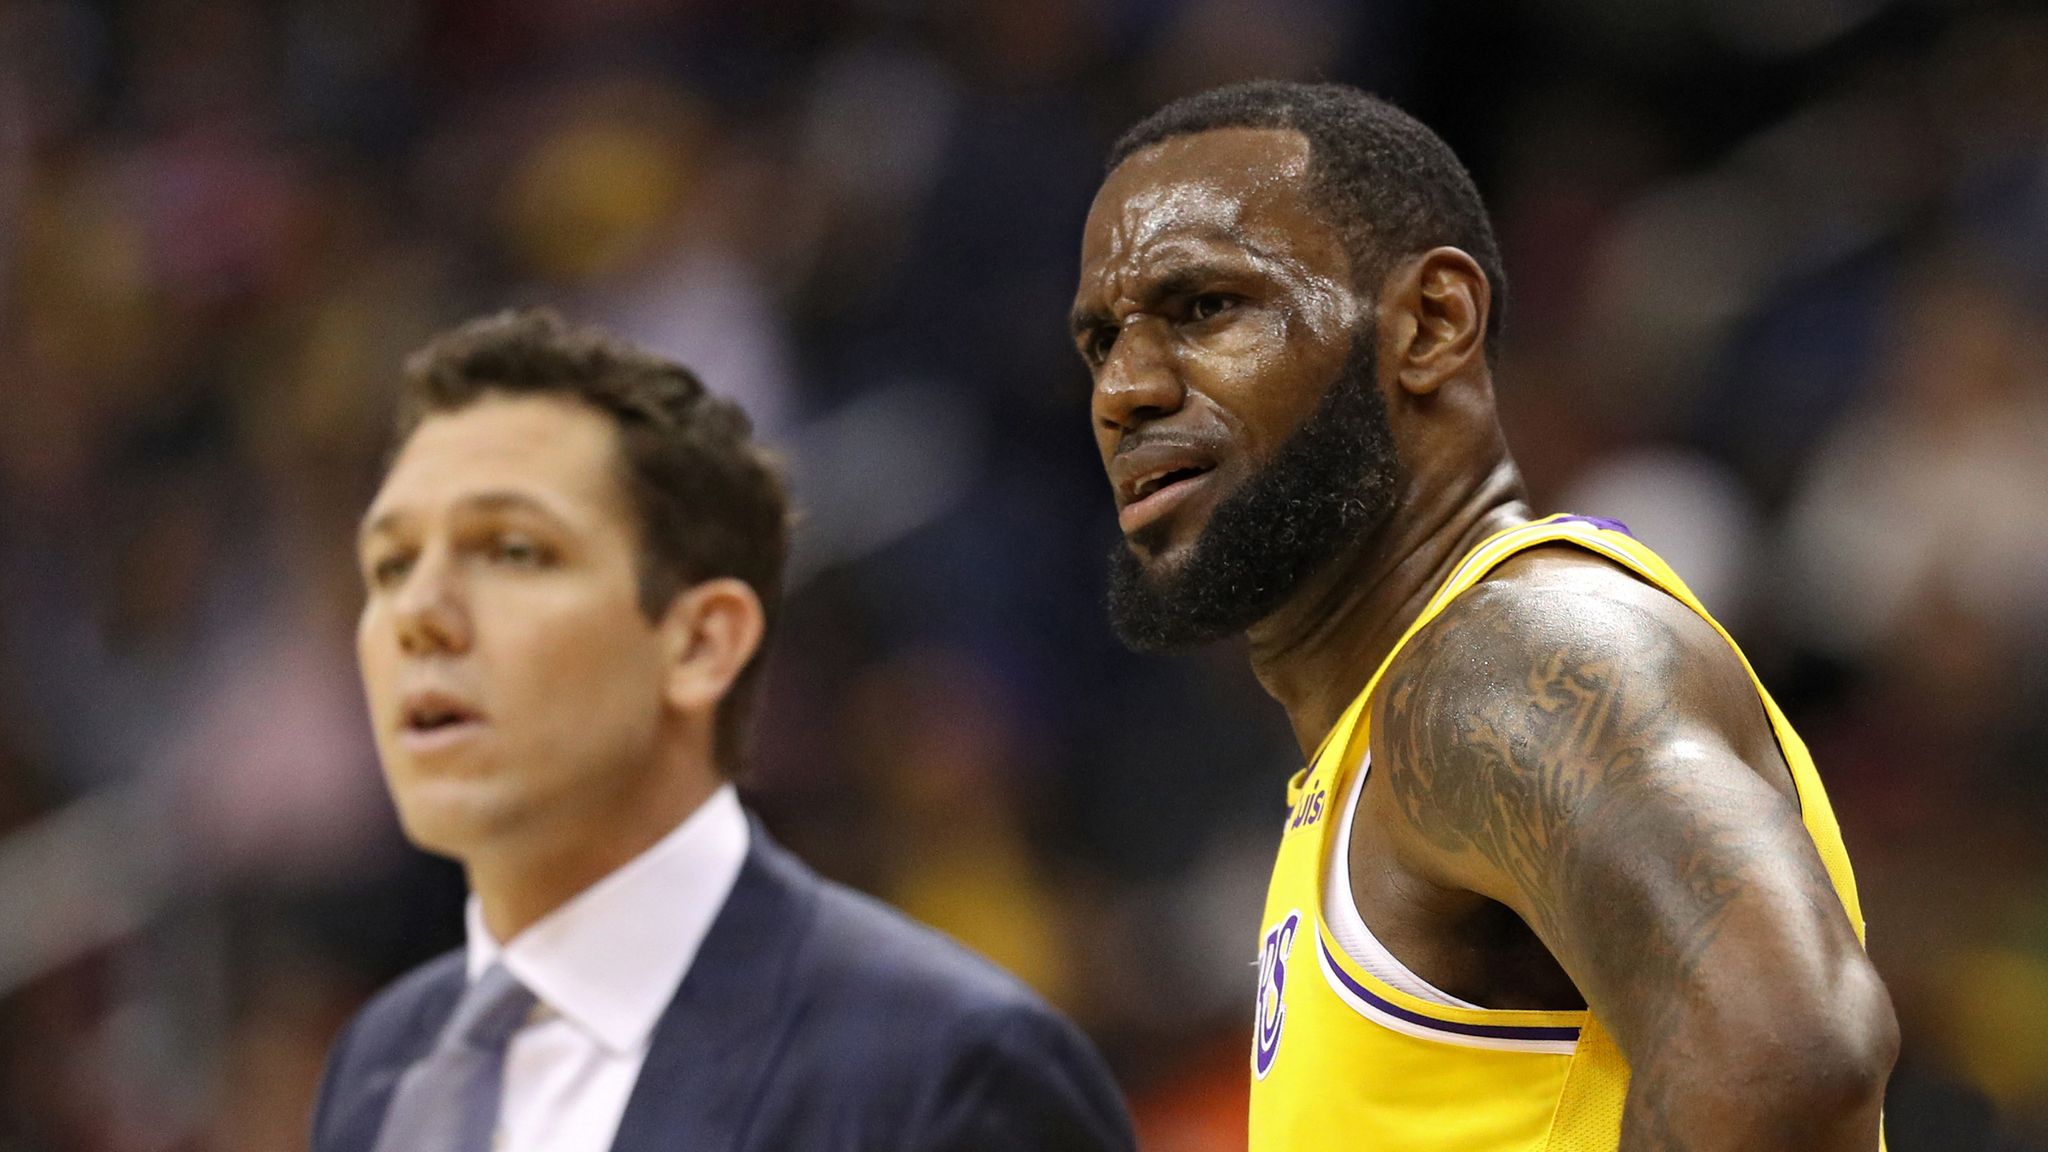 Luke Walton Already Has An Interview Lined Up With Another NBA